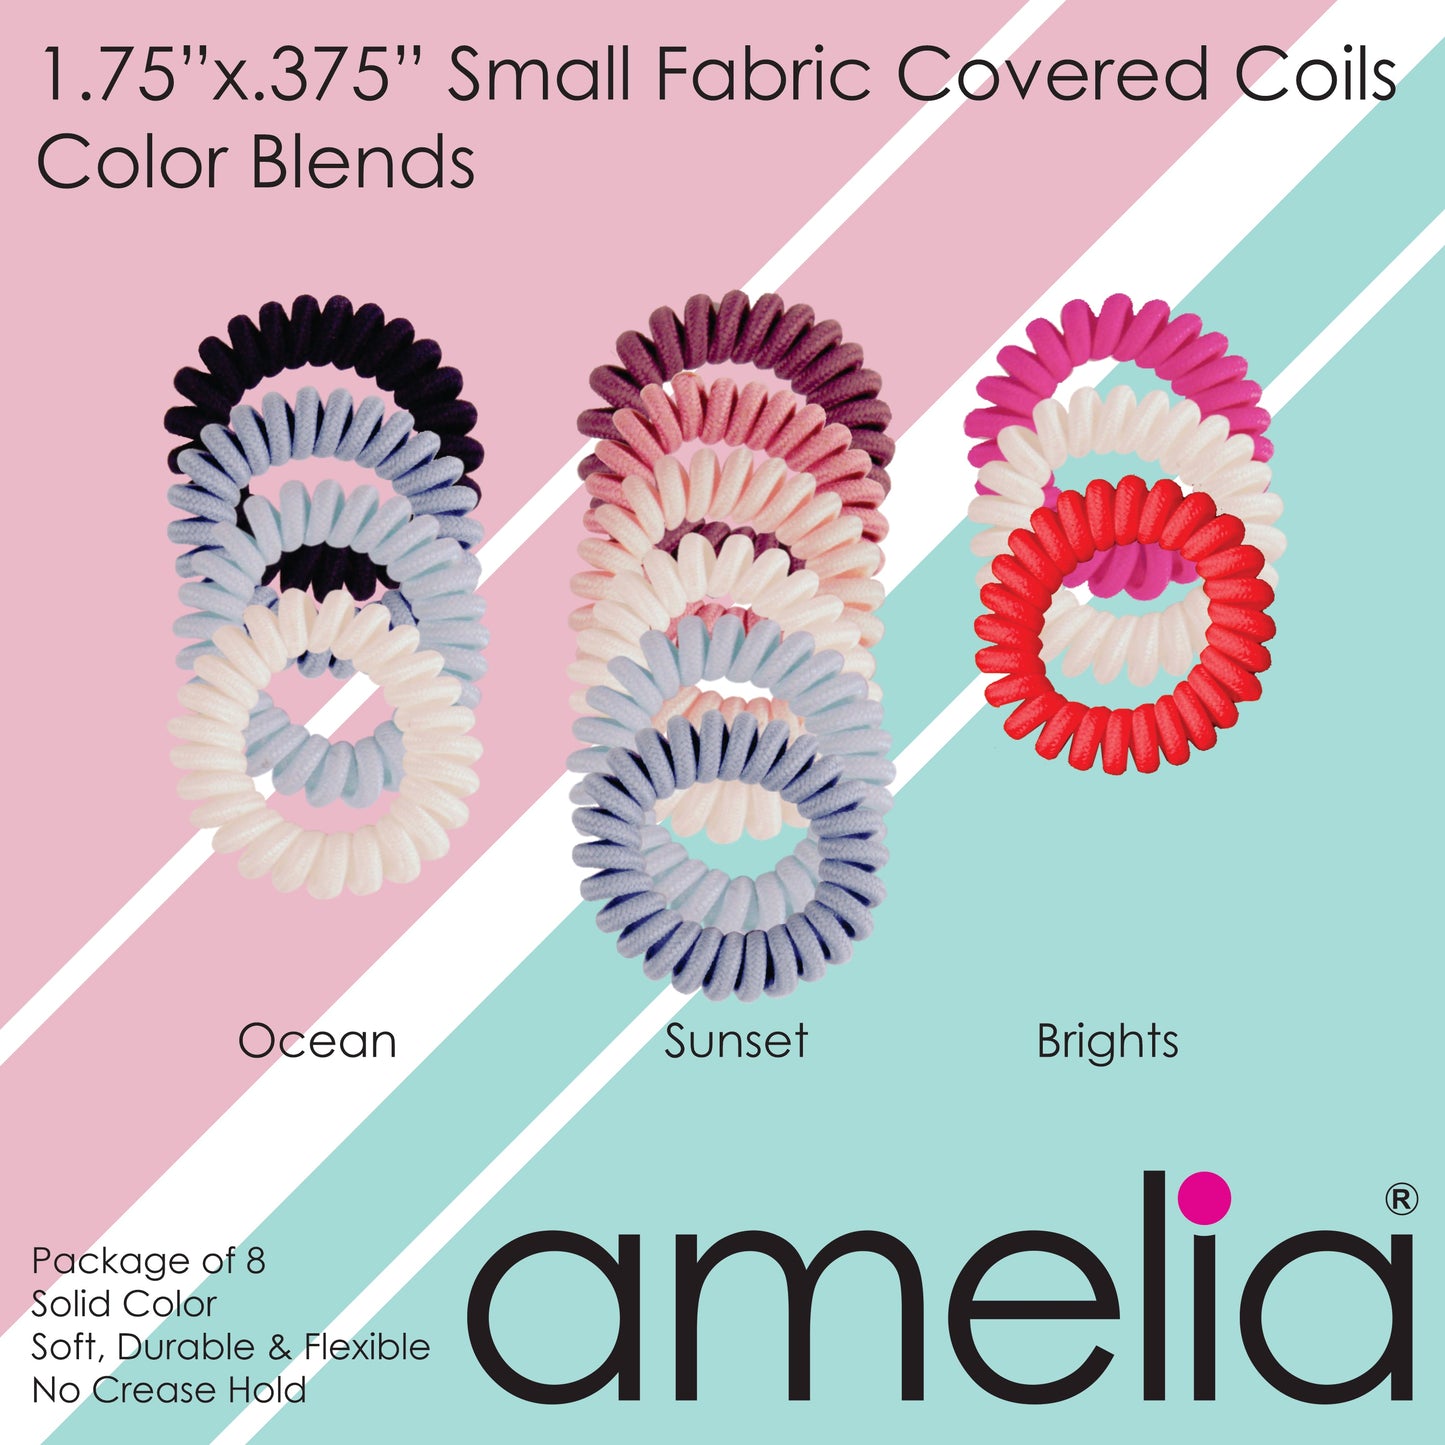 Amelia Beauty, 8 Small Fabric Wrapped Elastic Hair Coils, 1.75in Diameter Spiral Hair Ties, Gentle on Hair, Strong Hold and Minimizes Dents and Creases, White